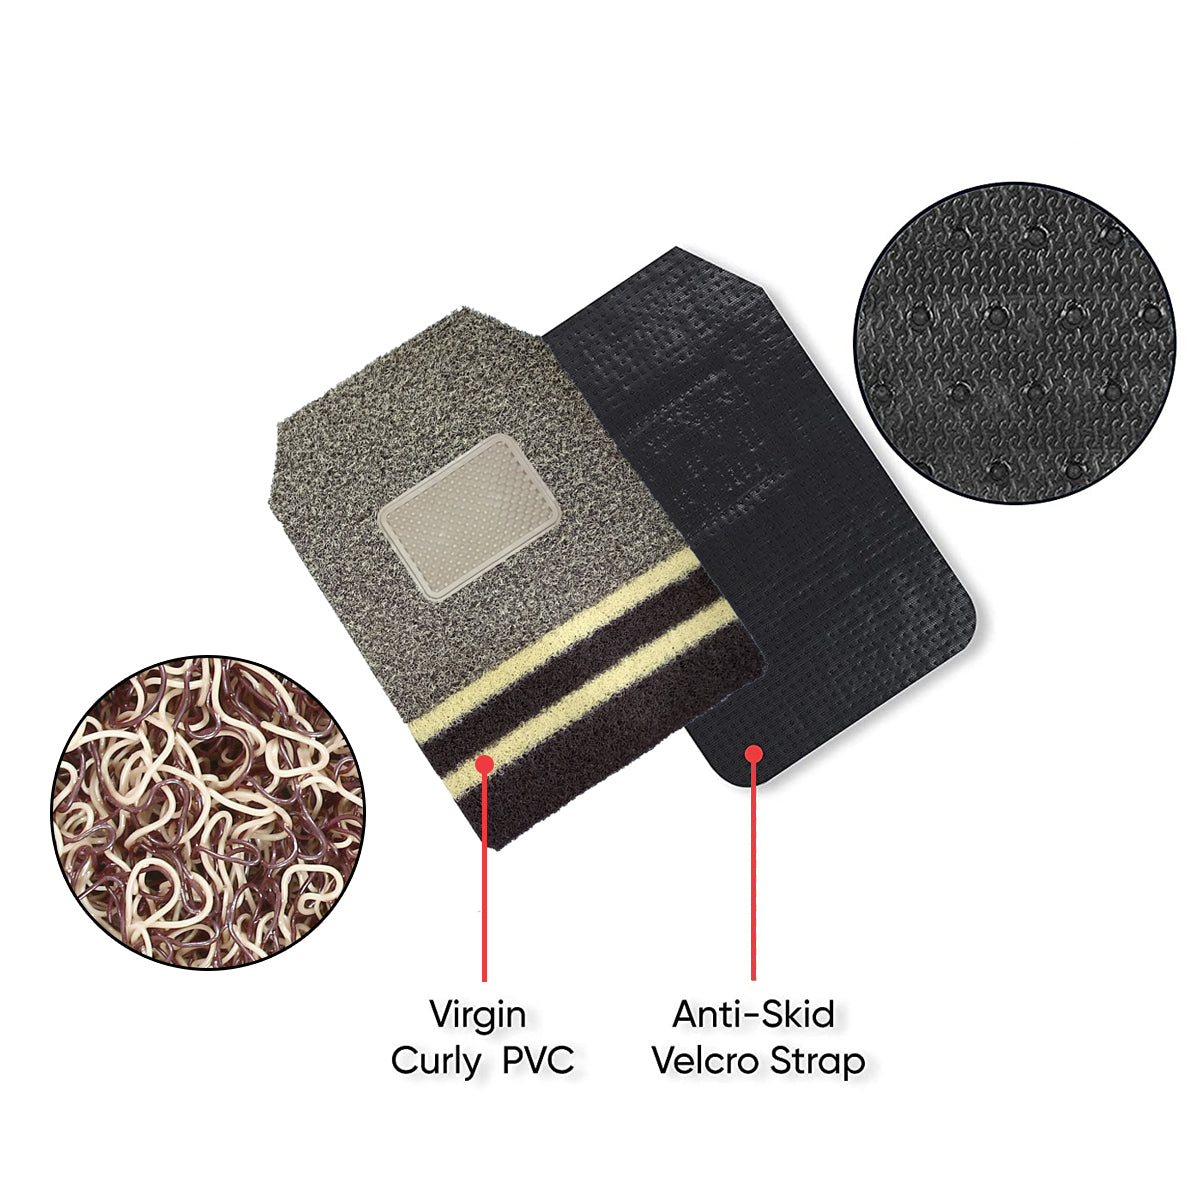 Oshotto Anti Skid Curly Noodle Grass 18mm Car Foot/Floor Mats for All Cars (Set of 5, Beige,Brown)